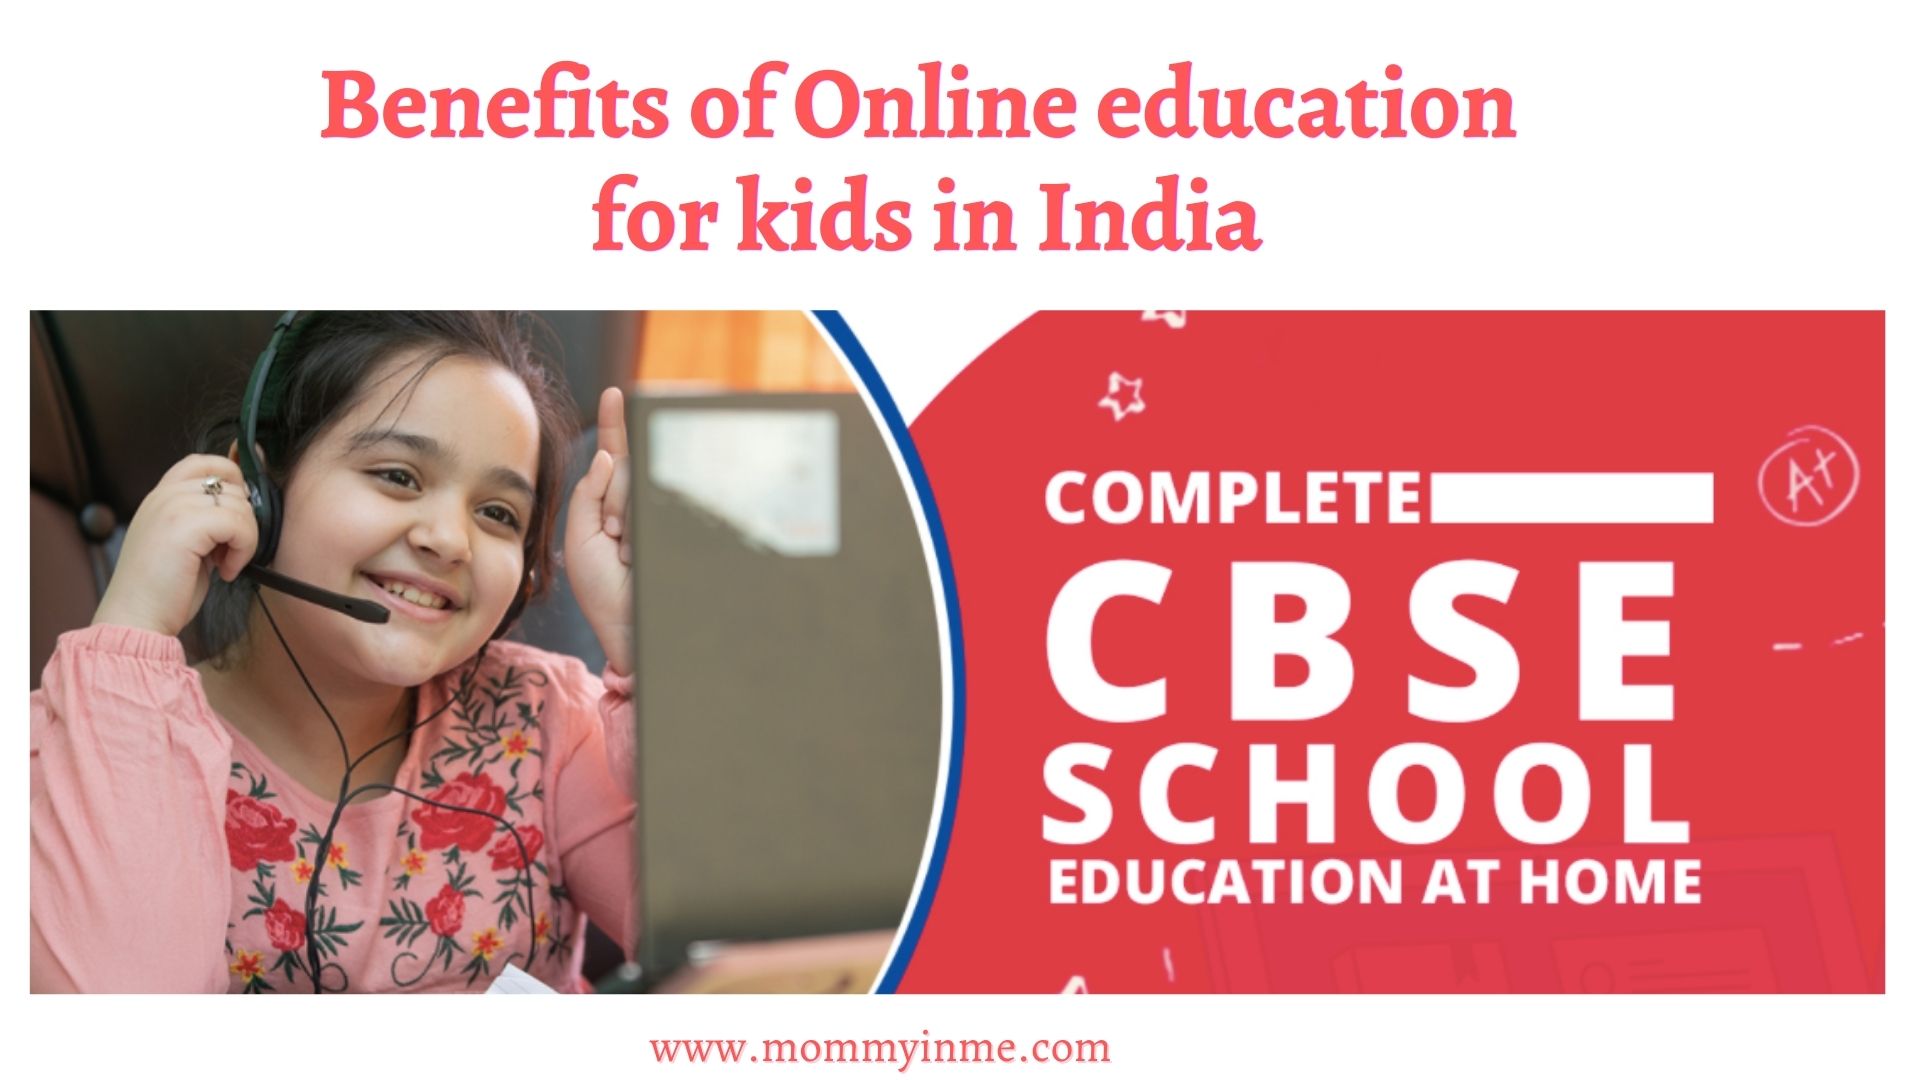 Online education for kids in India is affordable, more engaging and flexible as per the timings. Read the advantages of Online Education for Kids in India and more about AOL school. #Onlineeducationforkids #OnlineschoolsinIndia #AlwaysonLearningschool #benefitsofOnlineeducation #OnlineCBSESchool #AOLSchool